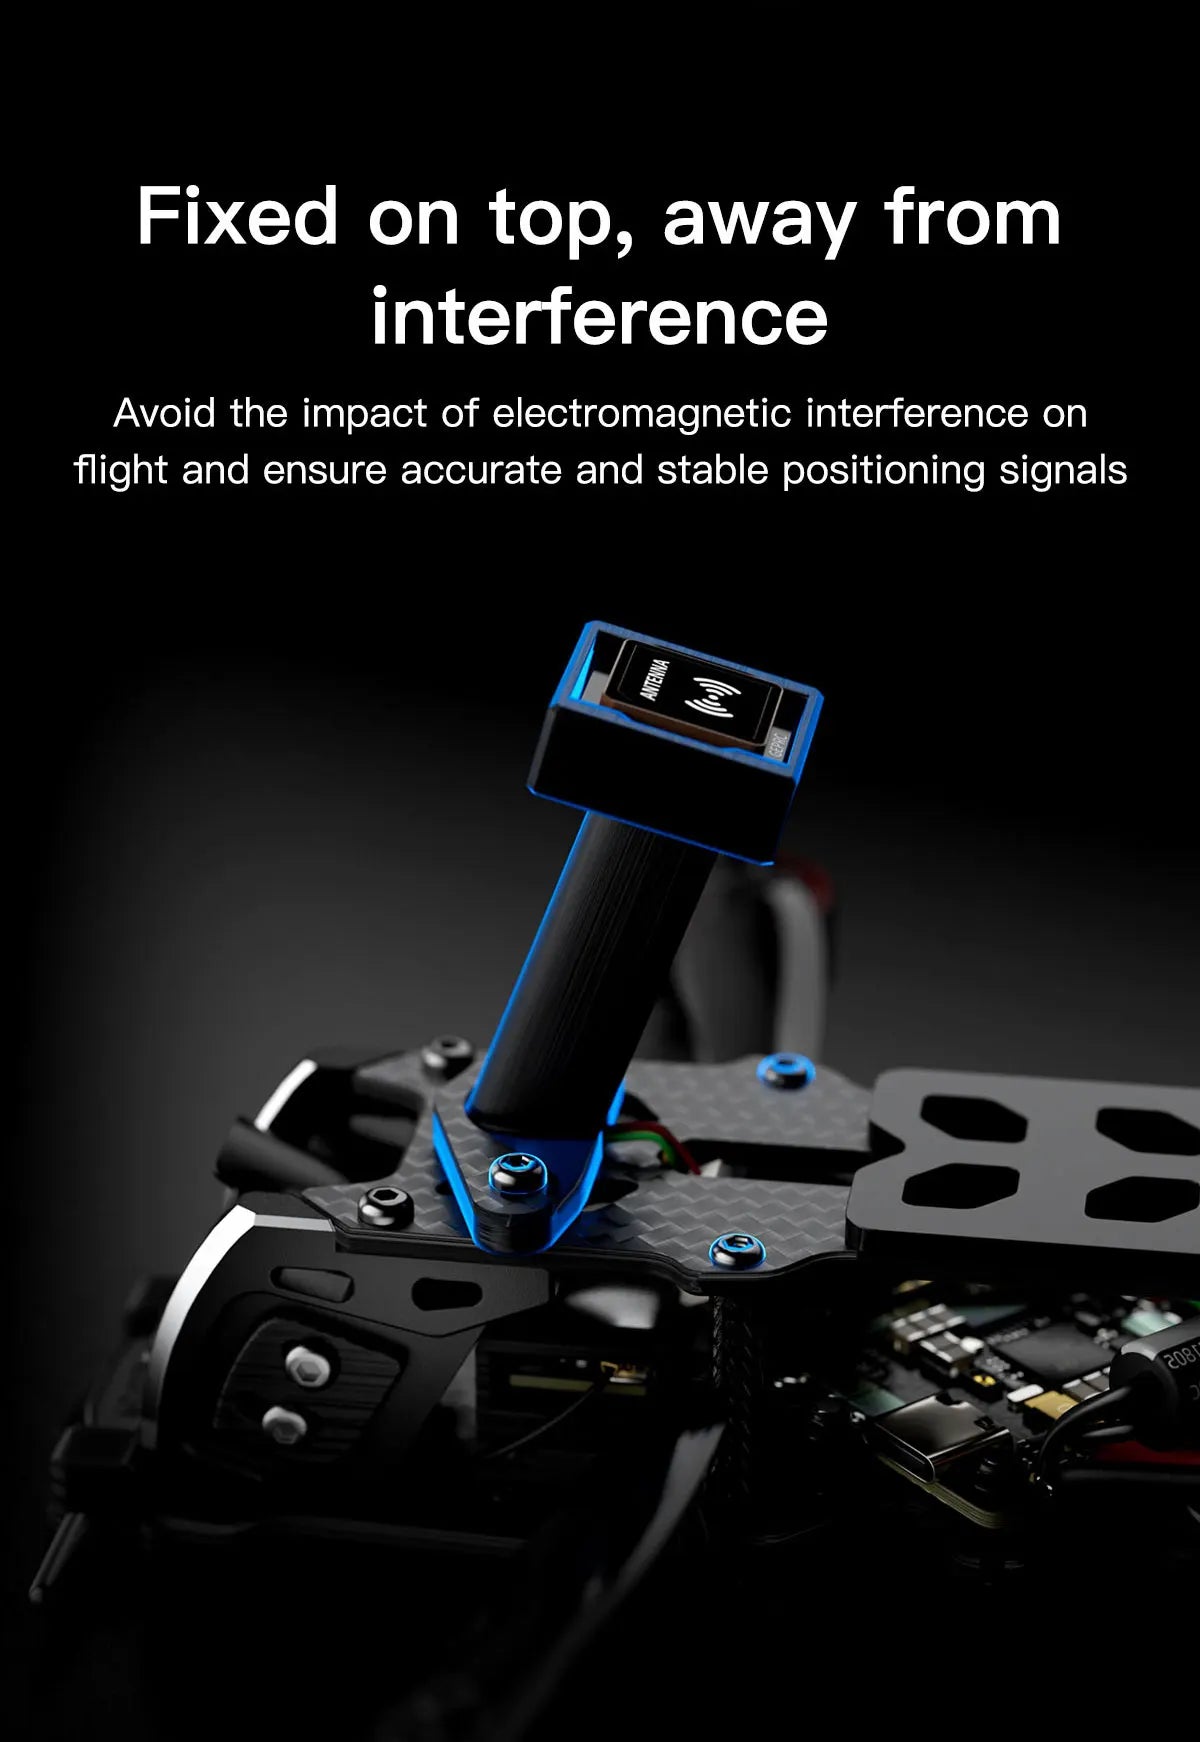 GEPRC Tern-LR40 HD Wasp Long Range FPV, fixed on top, away from interference Avoid the impact of electromagnetic interference on flight . ensure accurate